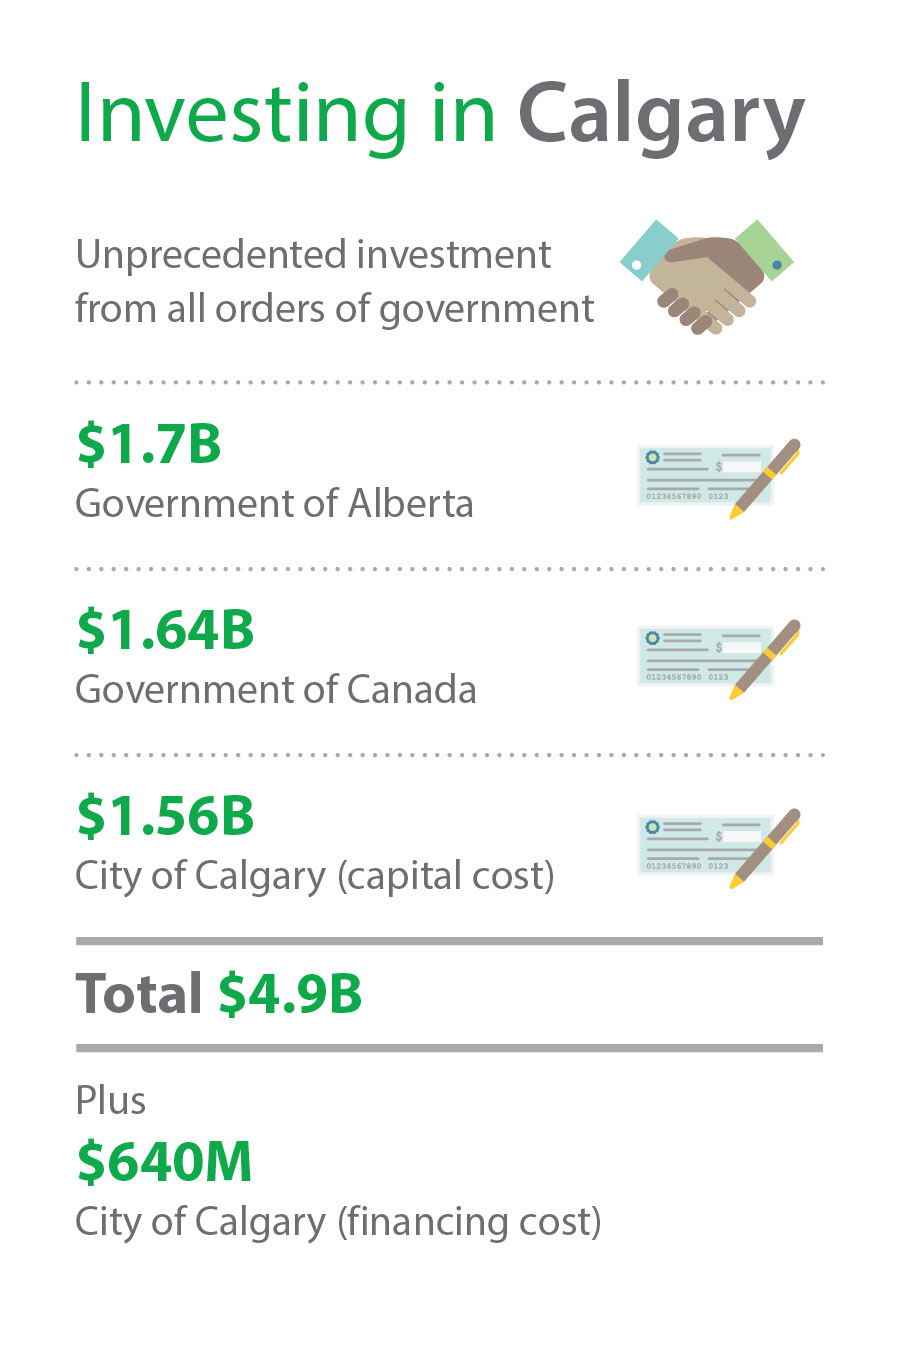 Investing in Calgary: Unprecedented investment from all orders of government - $1.7 billion from the Government of Alberta, $1.64 billion from the Government of Canada and $1.56 billion from the City of Calgary (capital cost) for a total of $4.9 billion (plus $640 million from the City of Calgary (financing cost)).